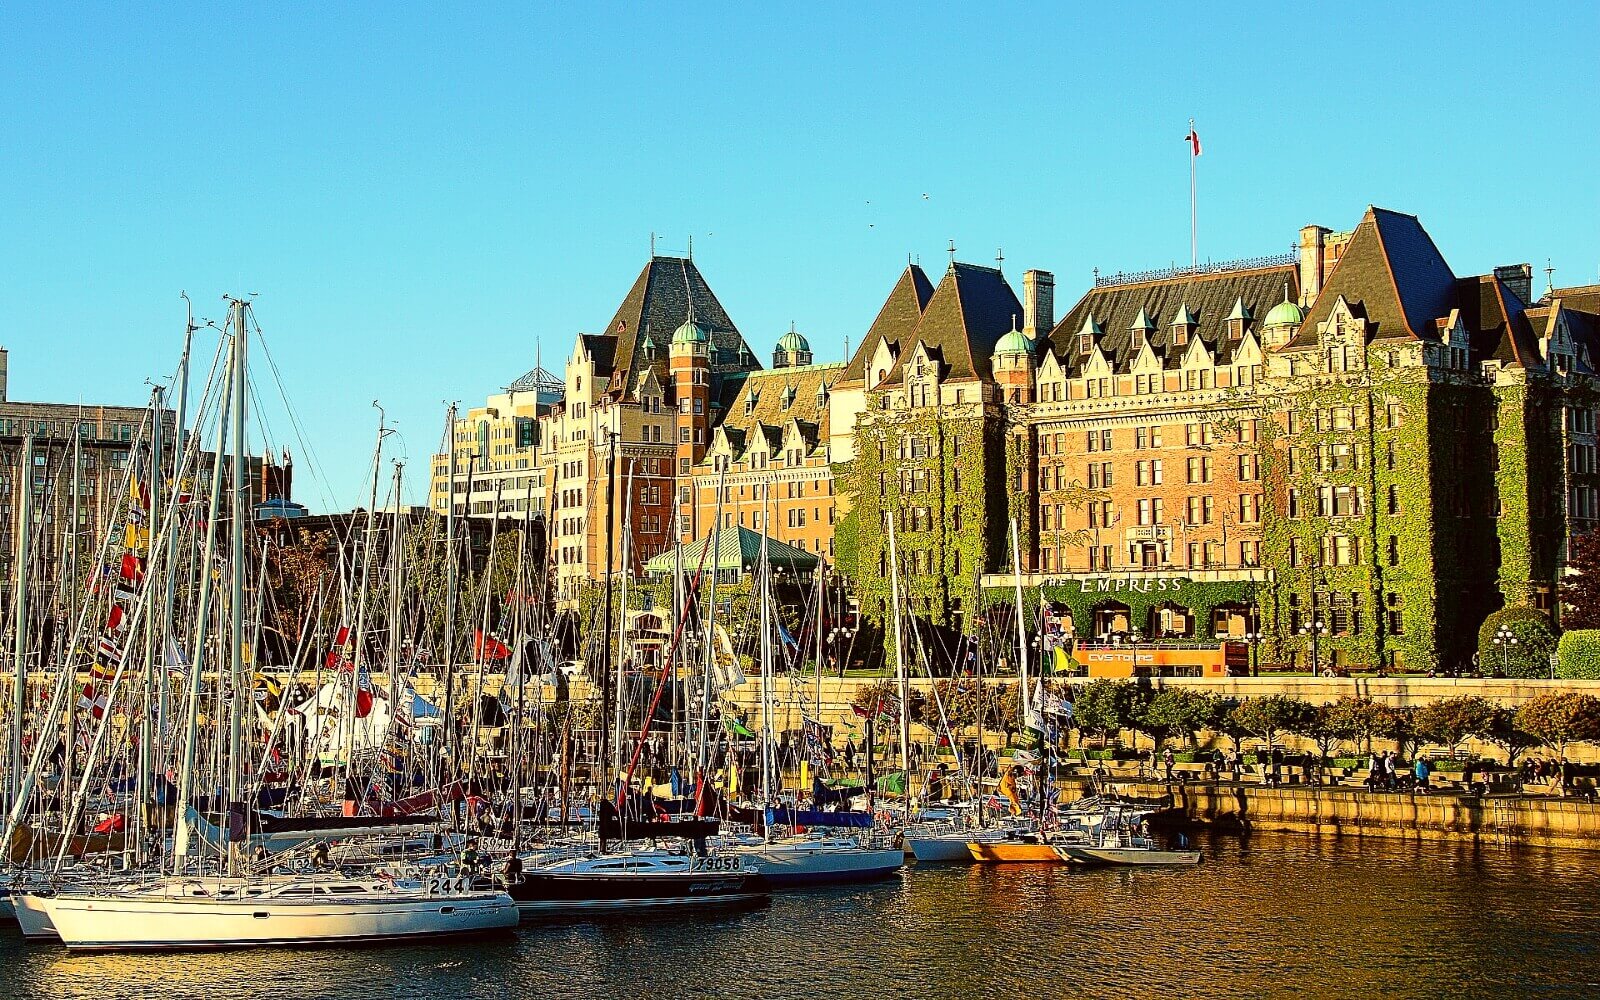 The Empress Hotel, in Victoria’s Inner Harbour